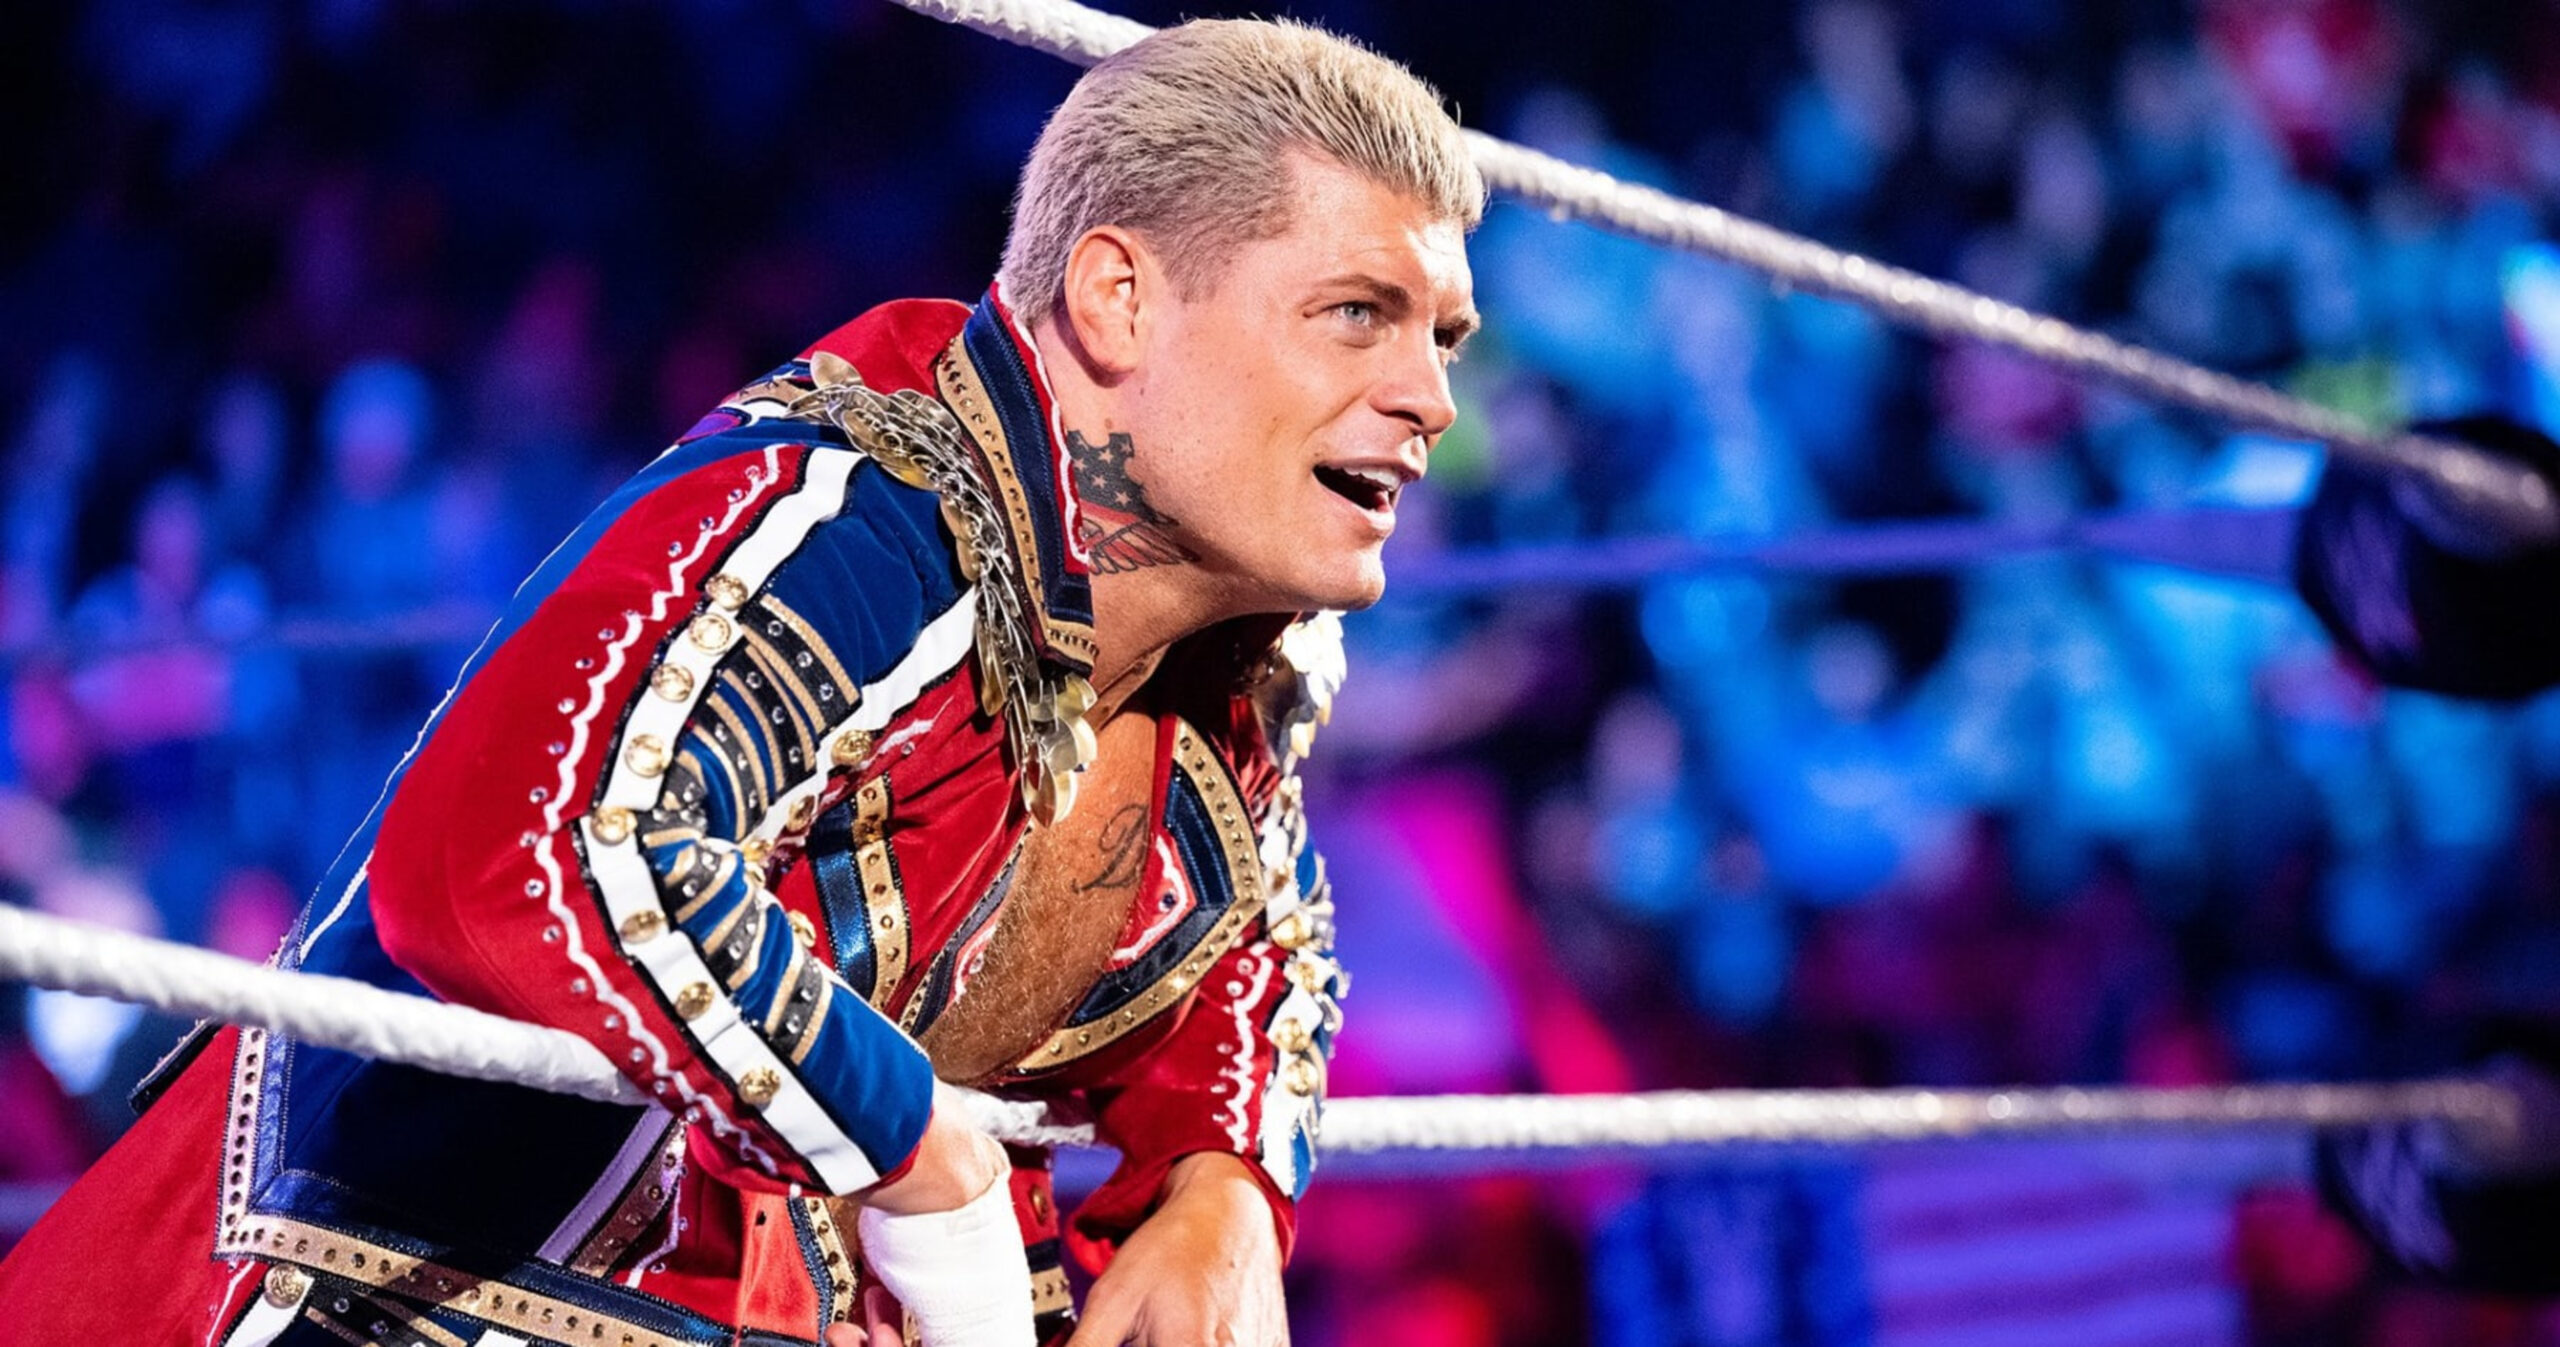 Cody Rhodes on the ropes after hearing his wwe entrance theme say "Wrestling Has More Than One Royal Family"